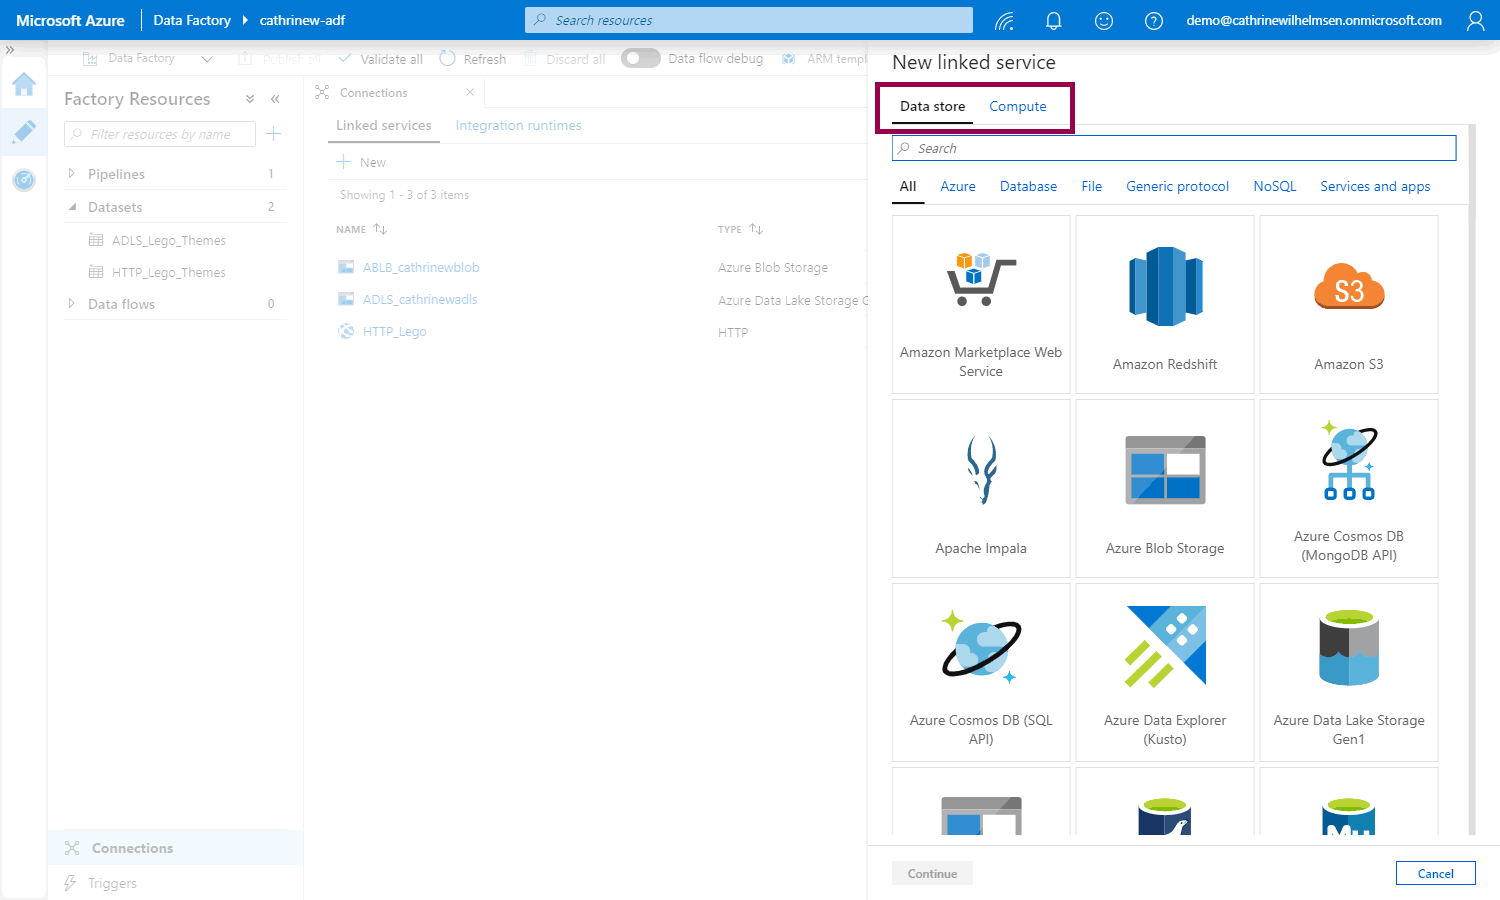 Screenshot of the new linked service pane, highlighting data stores